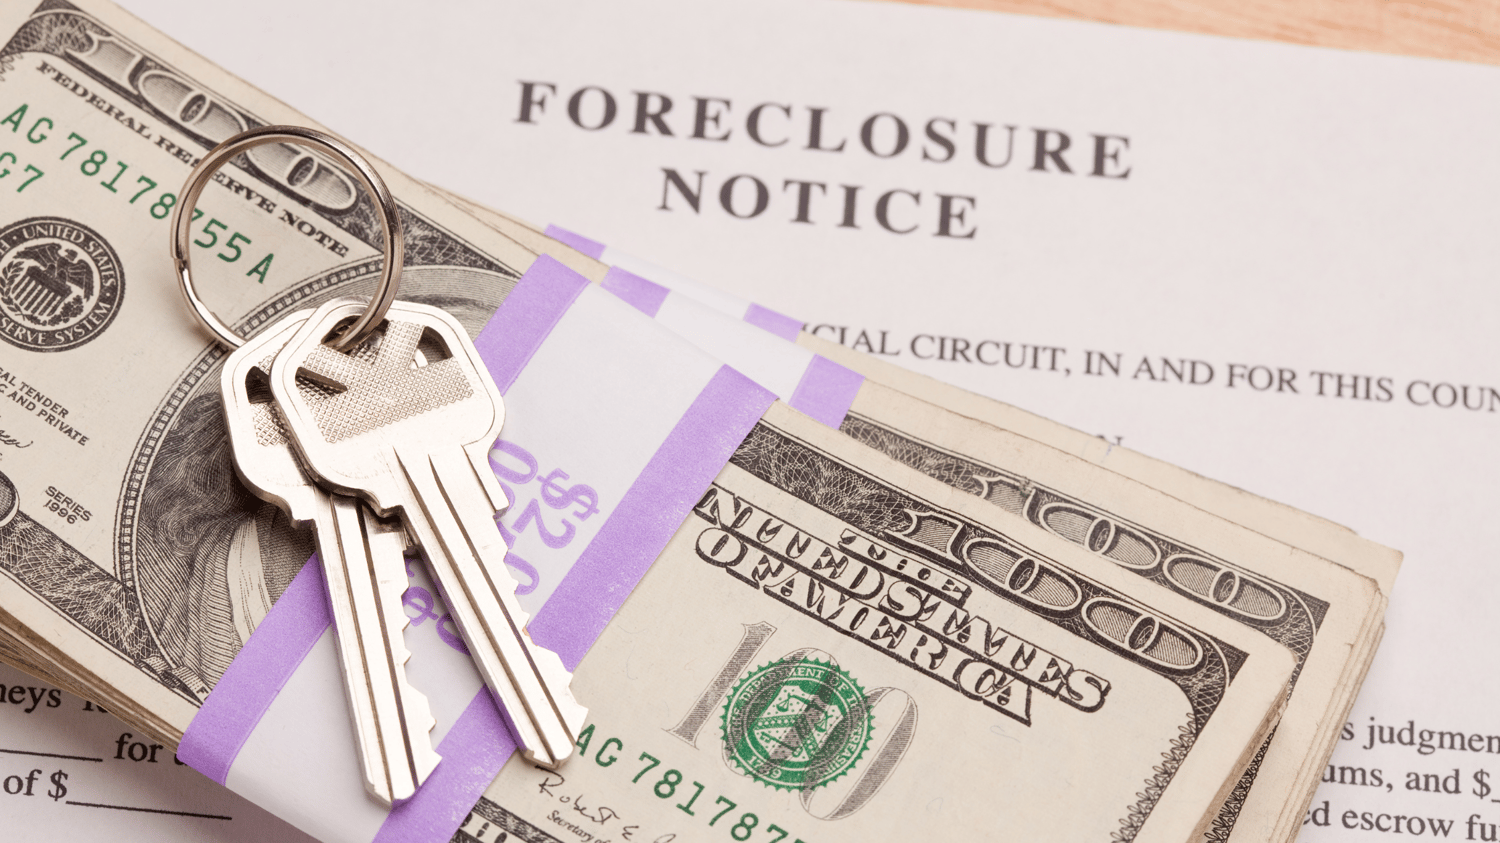 HOW TO RECLAIM SURPLUS FUNDS AFTER FORECLOSURE